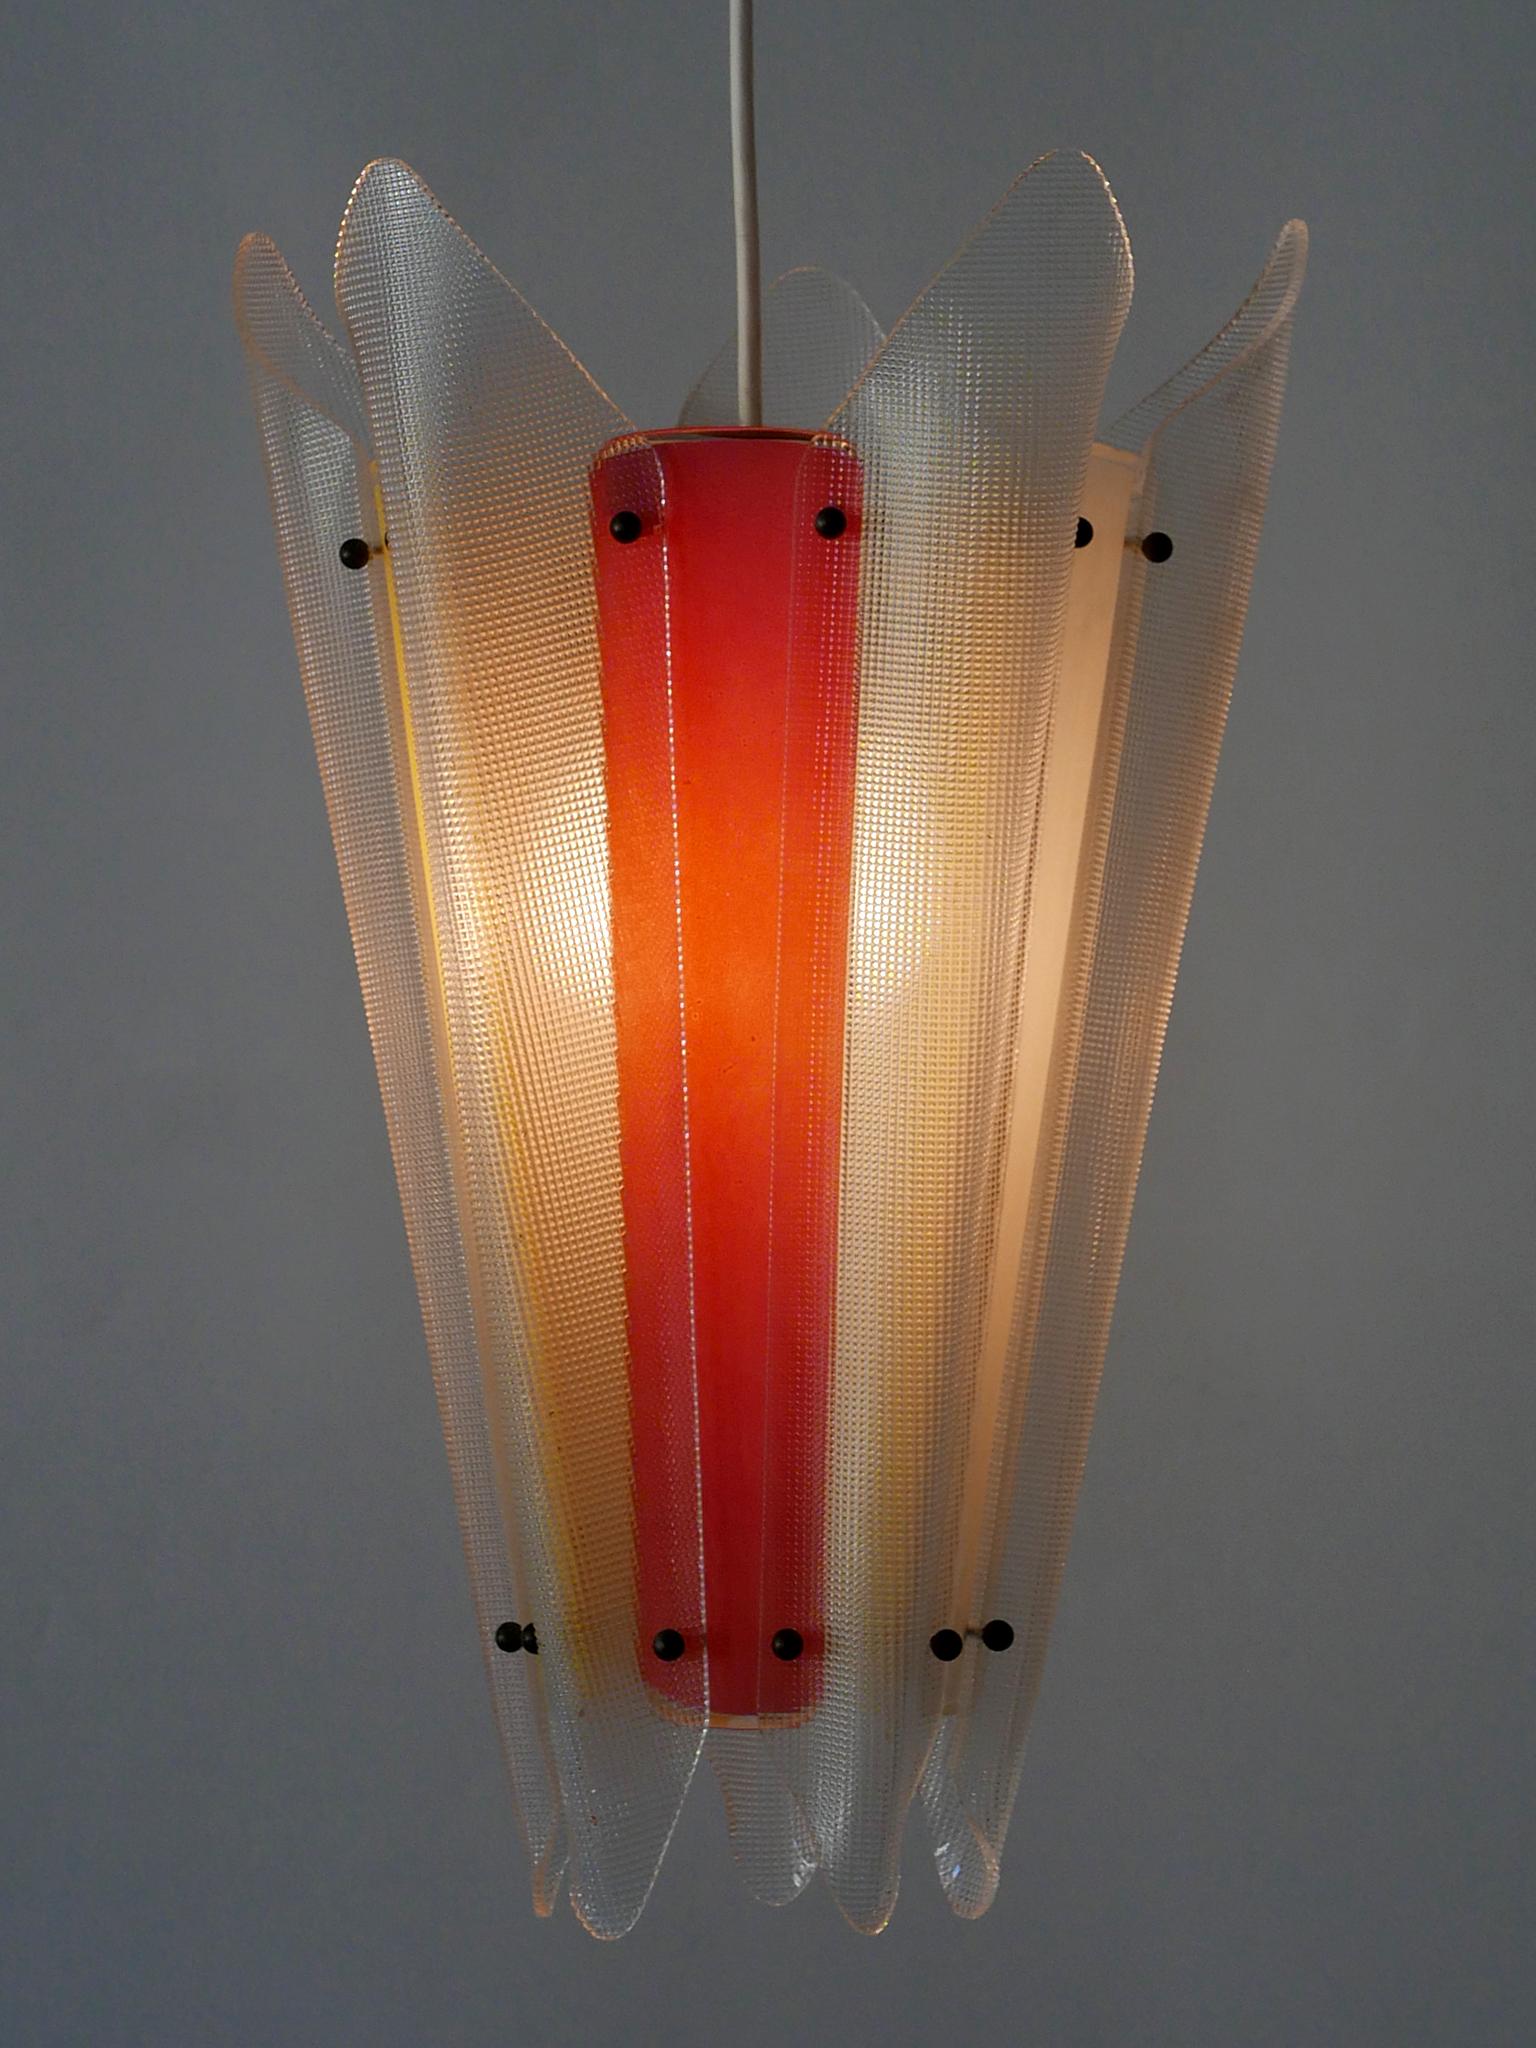 Extremely rare and highly decorative Mid-Century Modern multi-colored pendant lamp or hanging light. Designed and manufactured in Germany, 1960s.

Executed in multi-colored lucite, the lamp needs 1 x E27 / E26 Edison screw fit bulb. It is rewired,